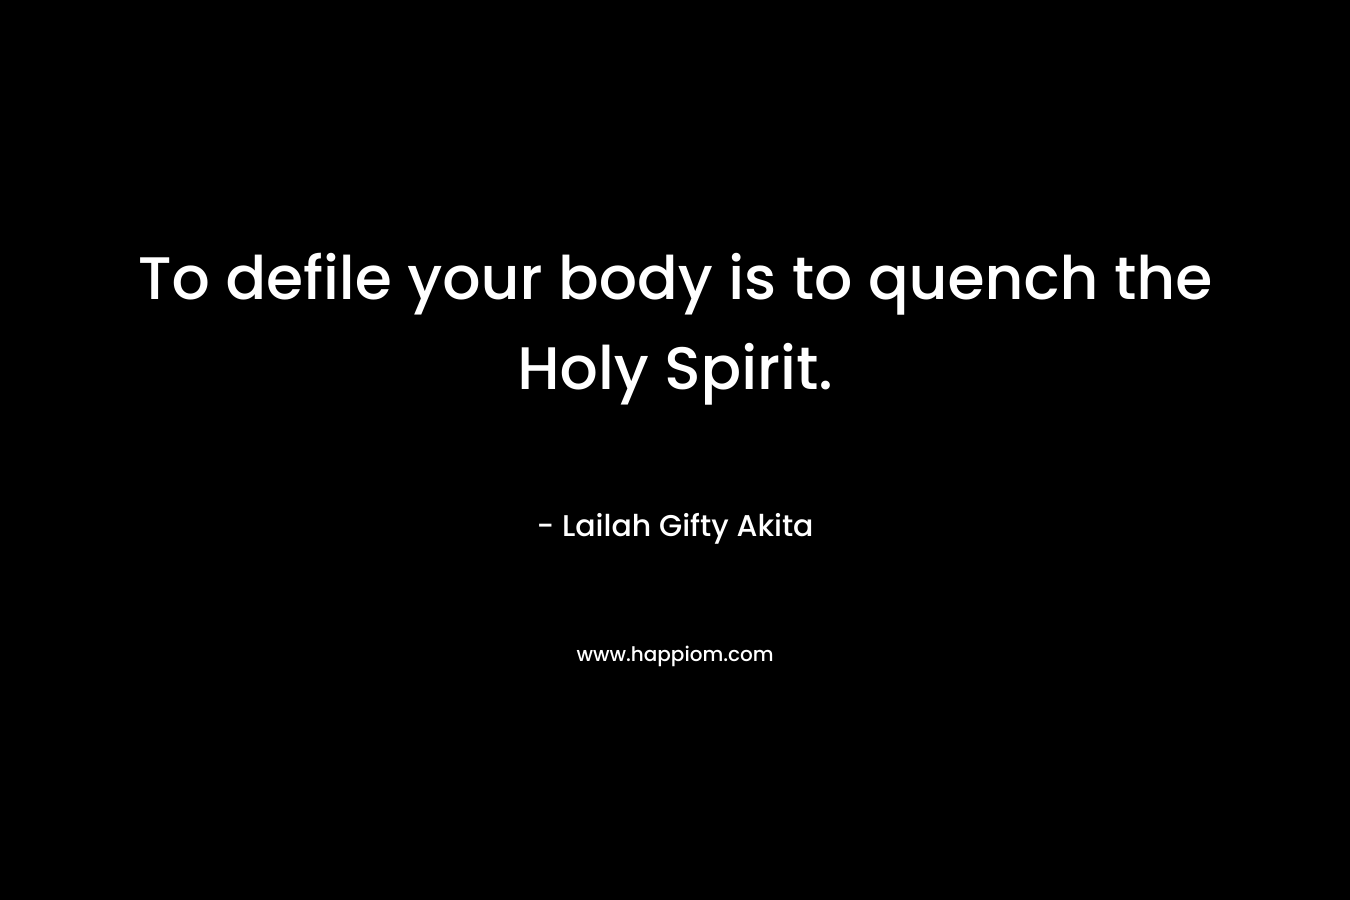 To defile your body is to quench the Holy Spirit.